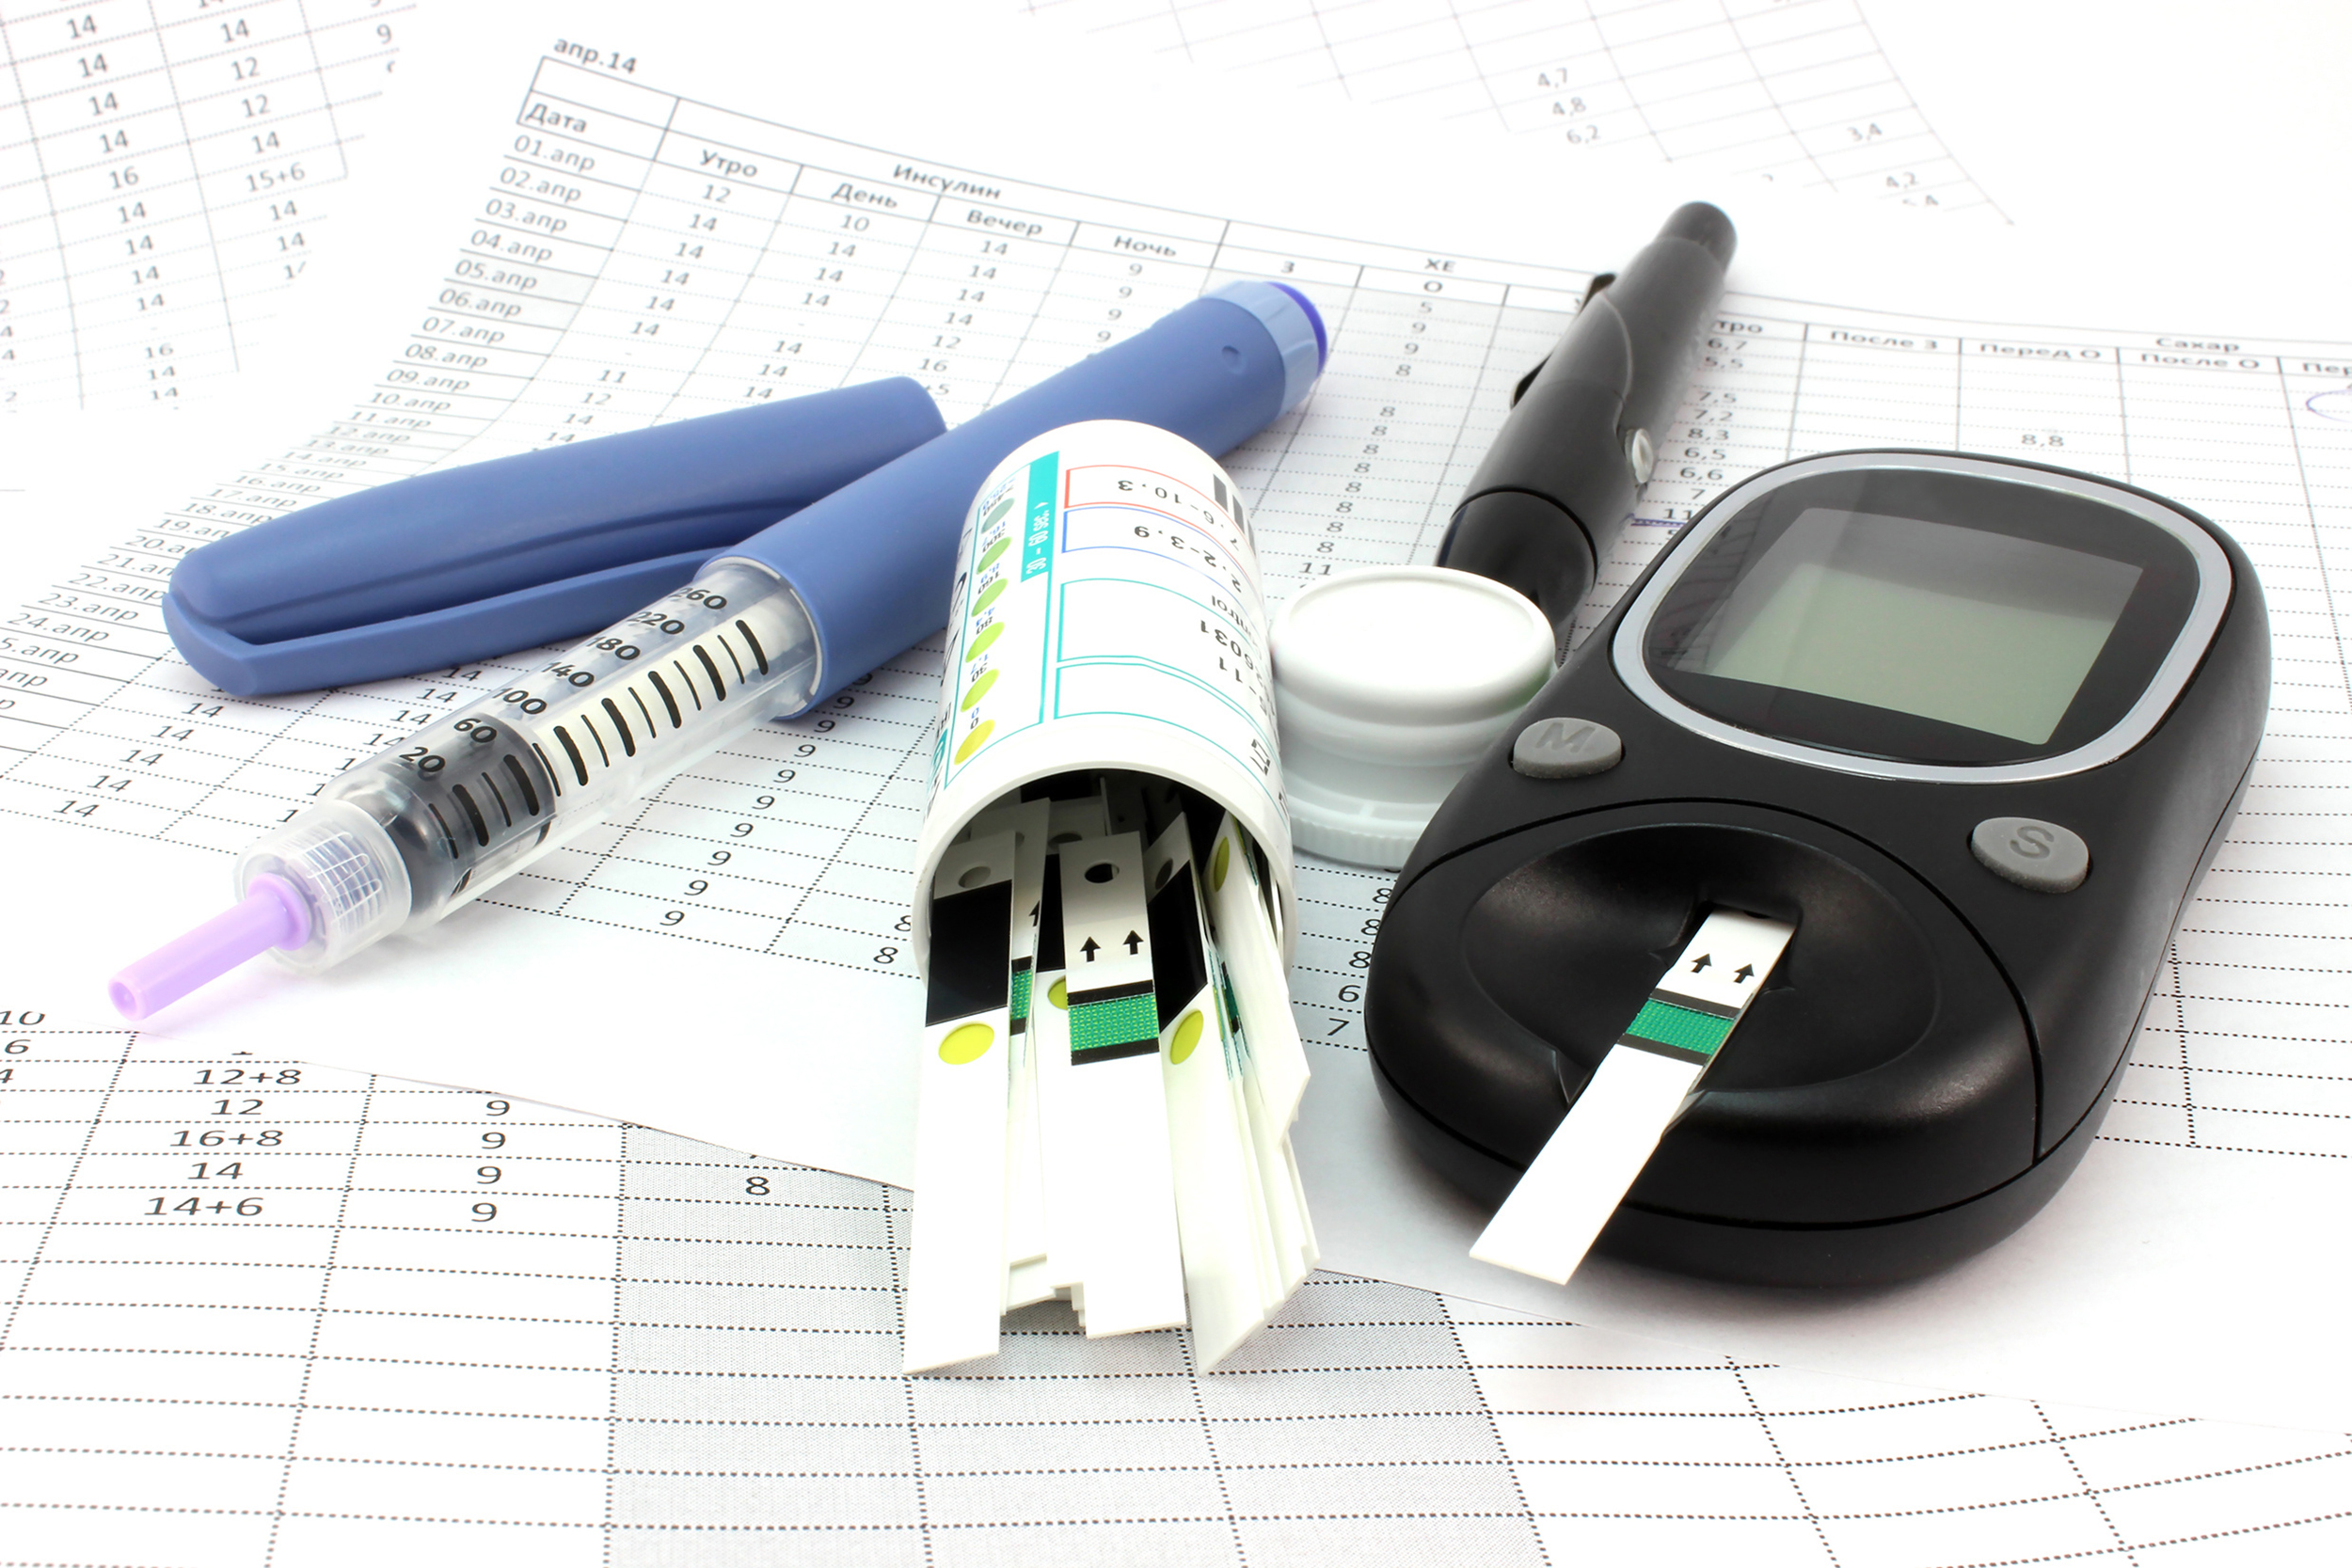 The glucometer, test strips, insulin against the backdrop of record results...